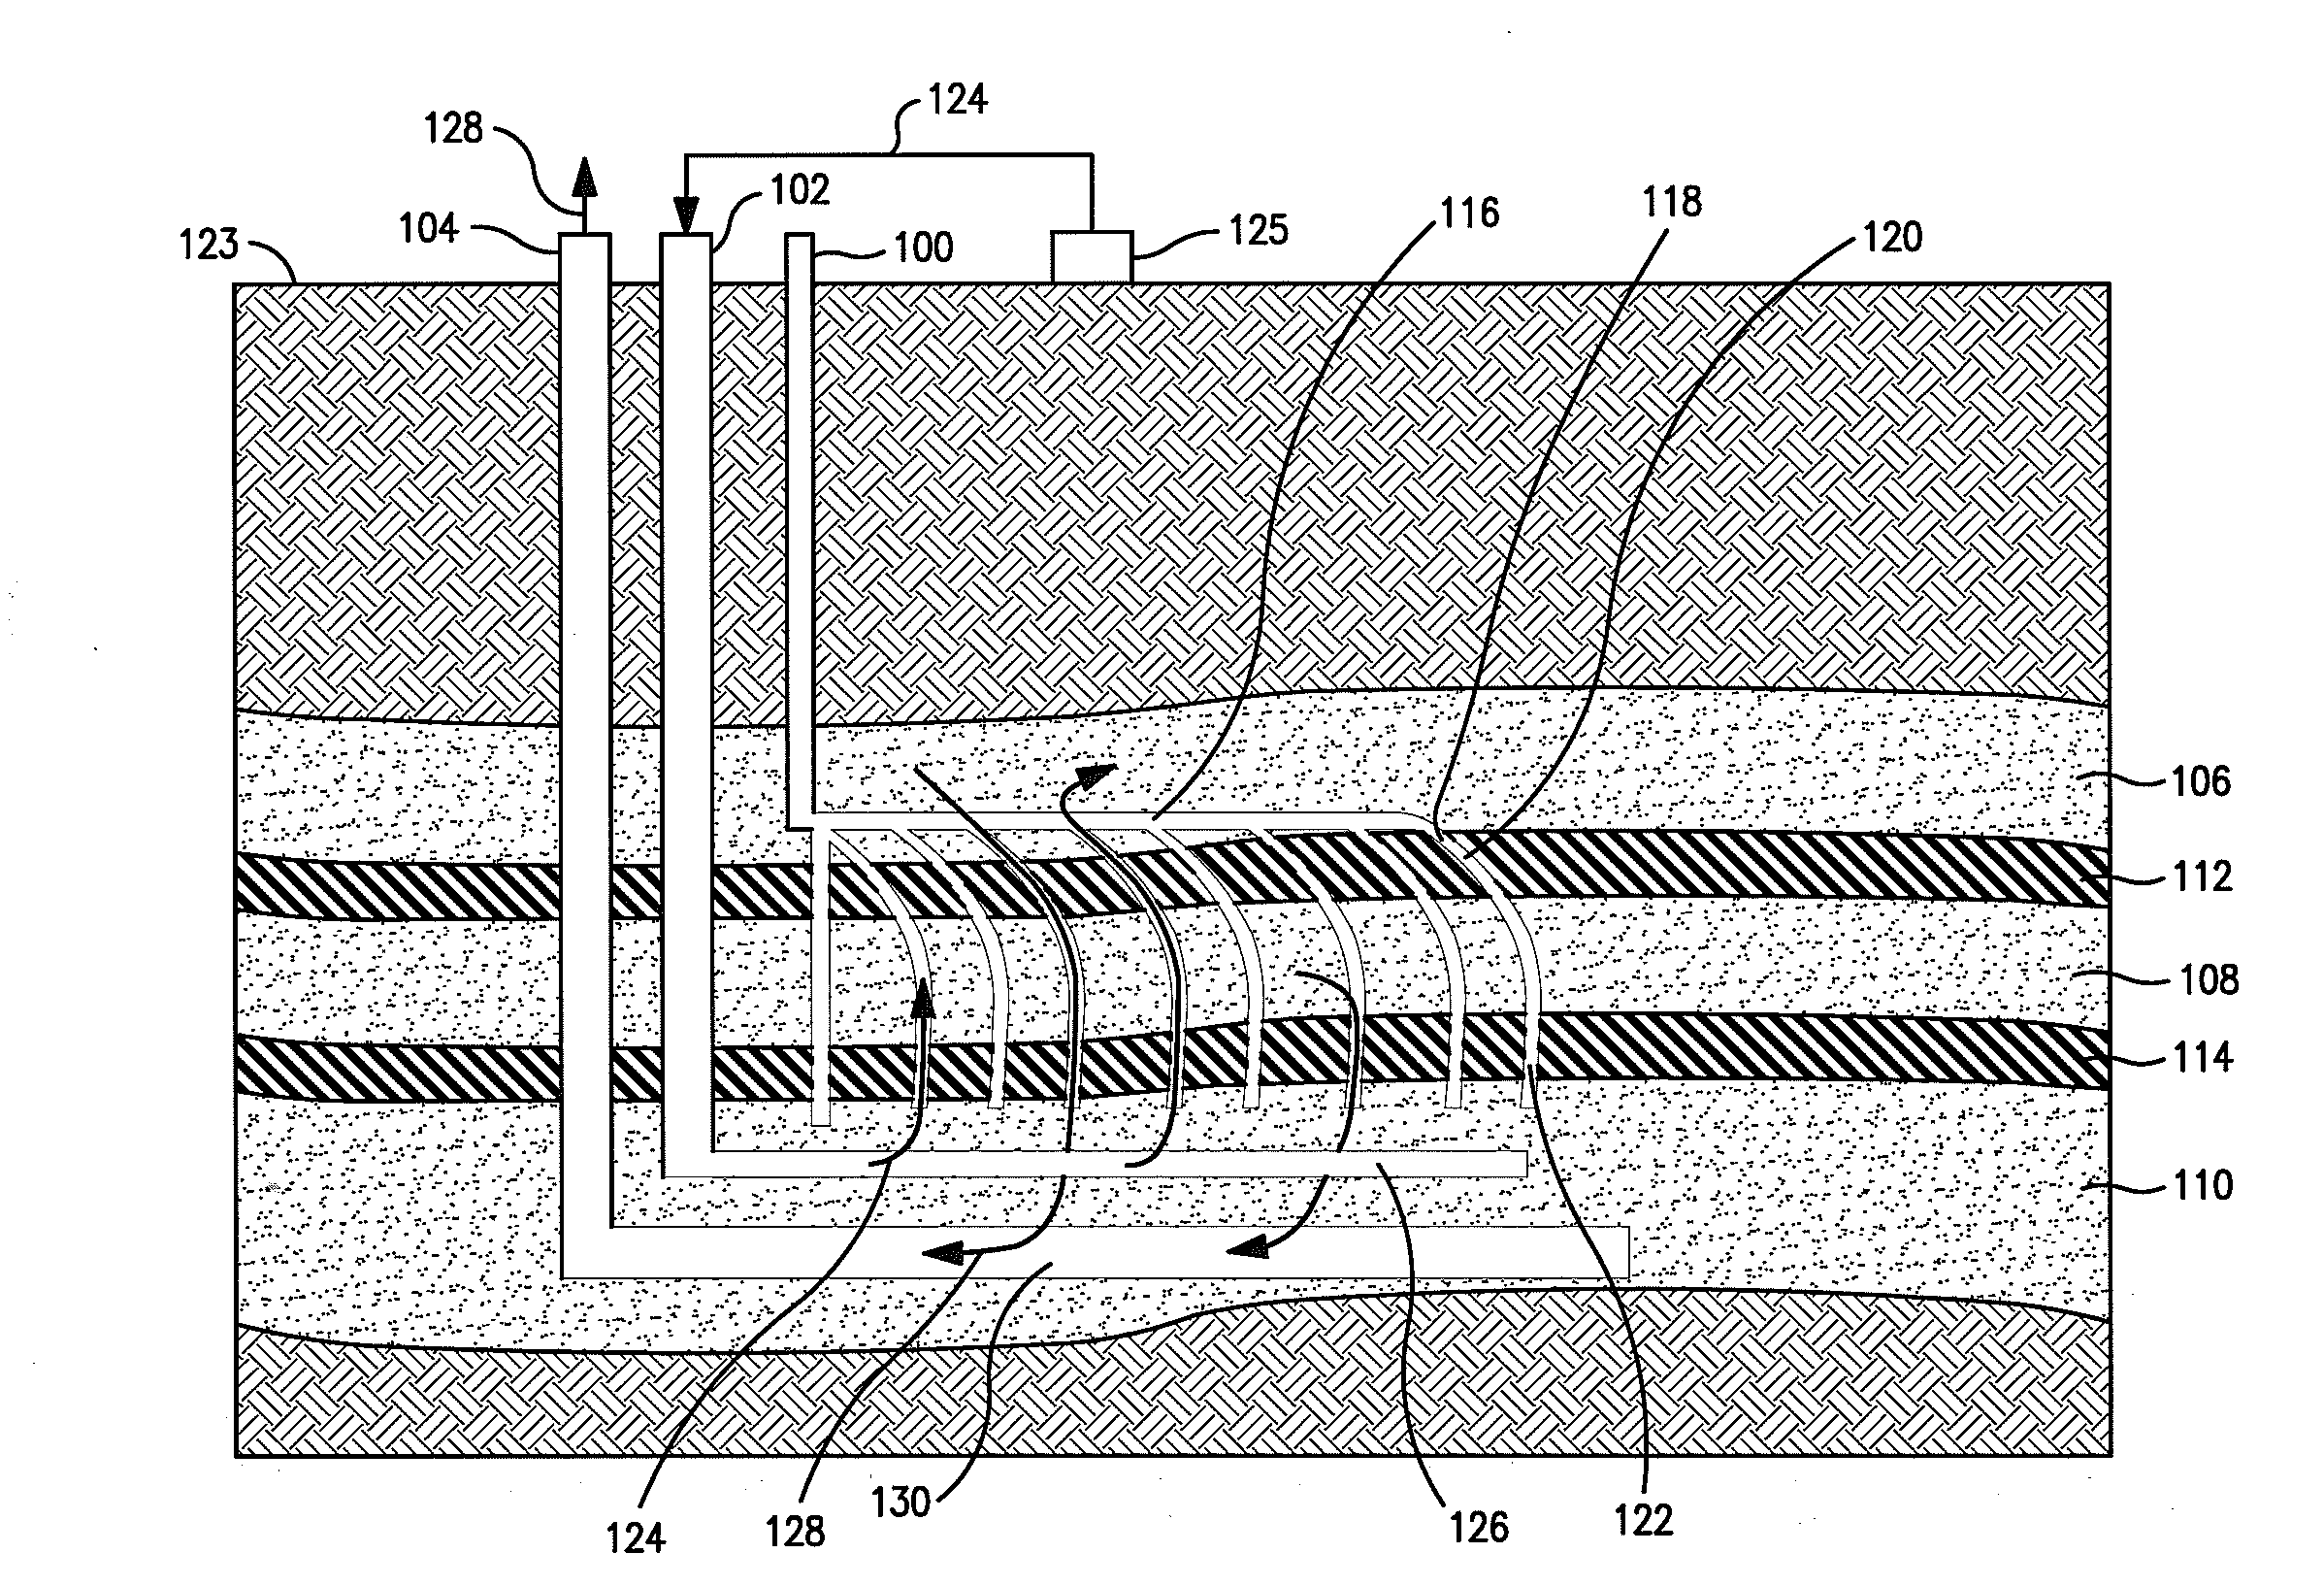 Draining a reservoir with an interbedded layer